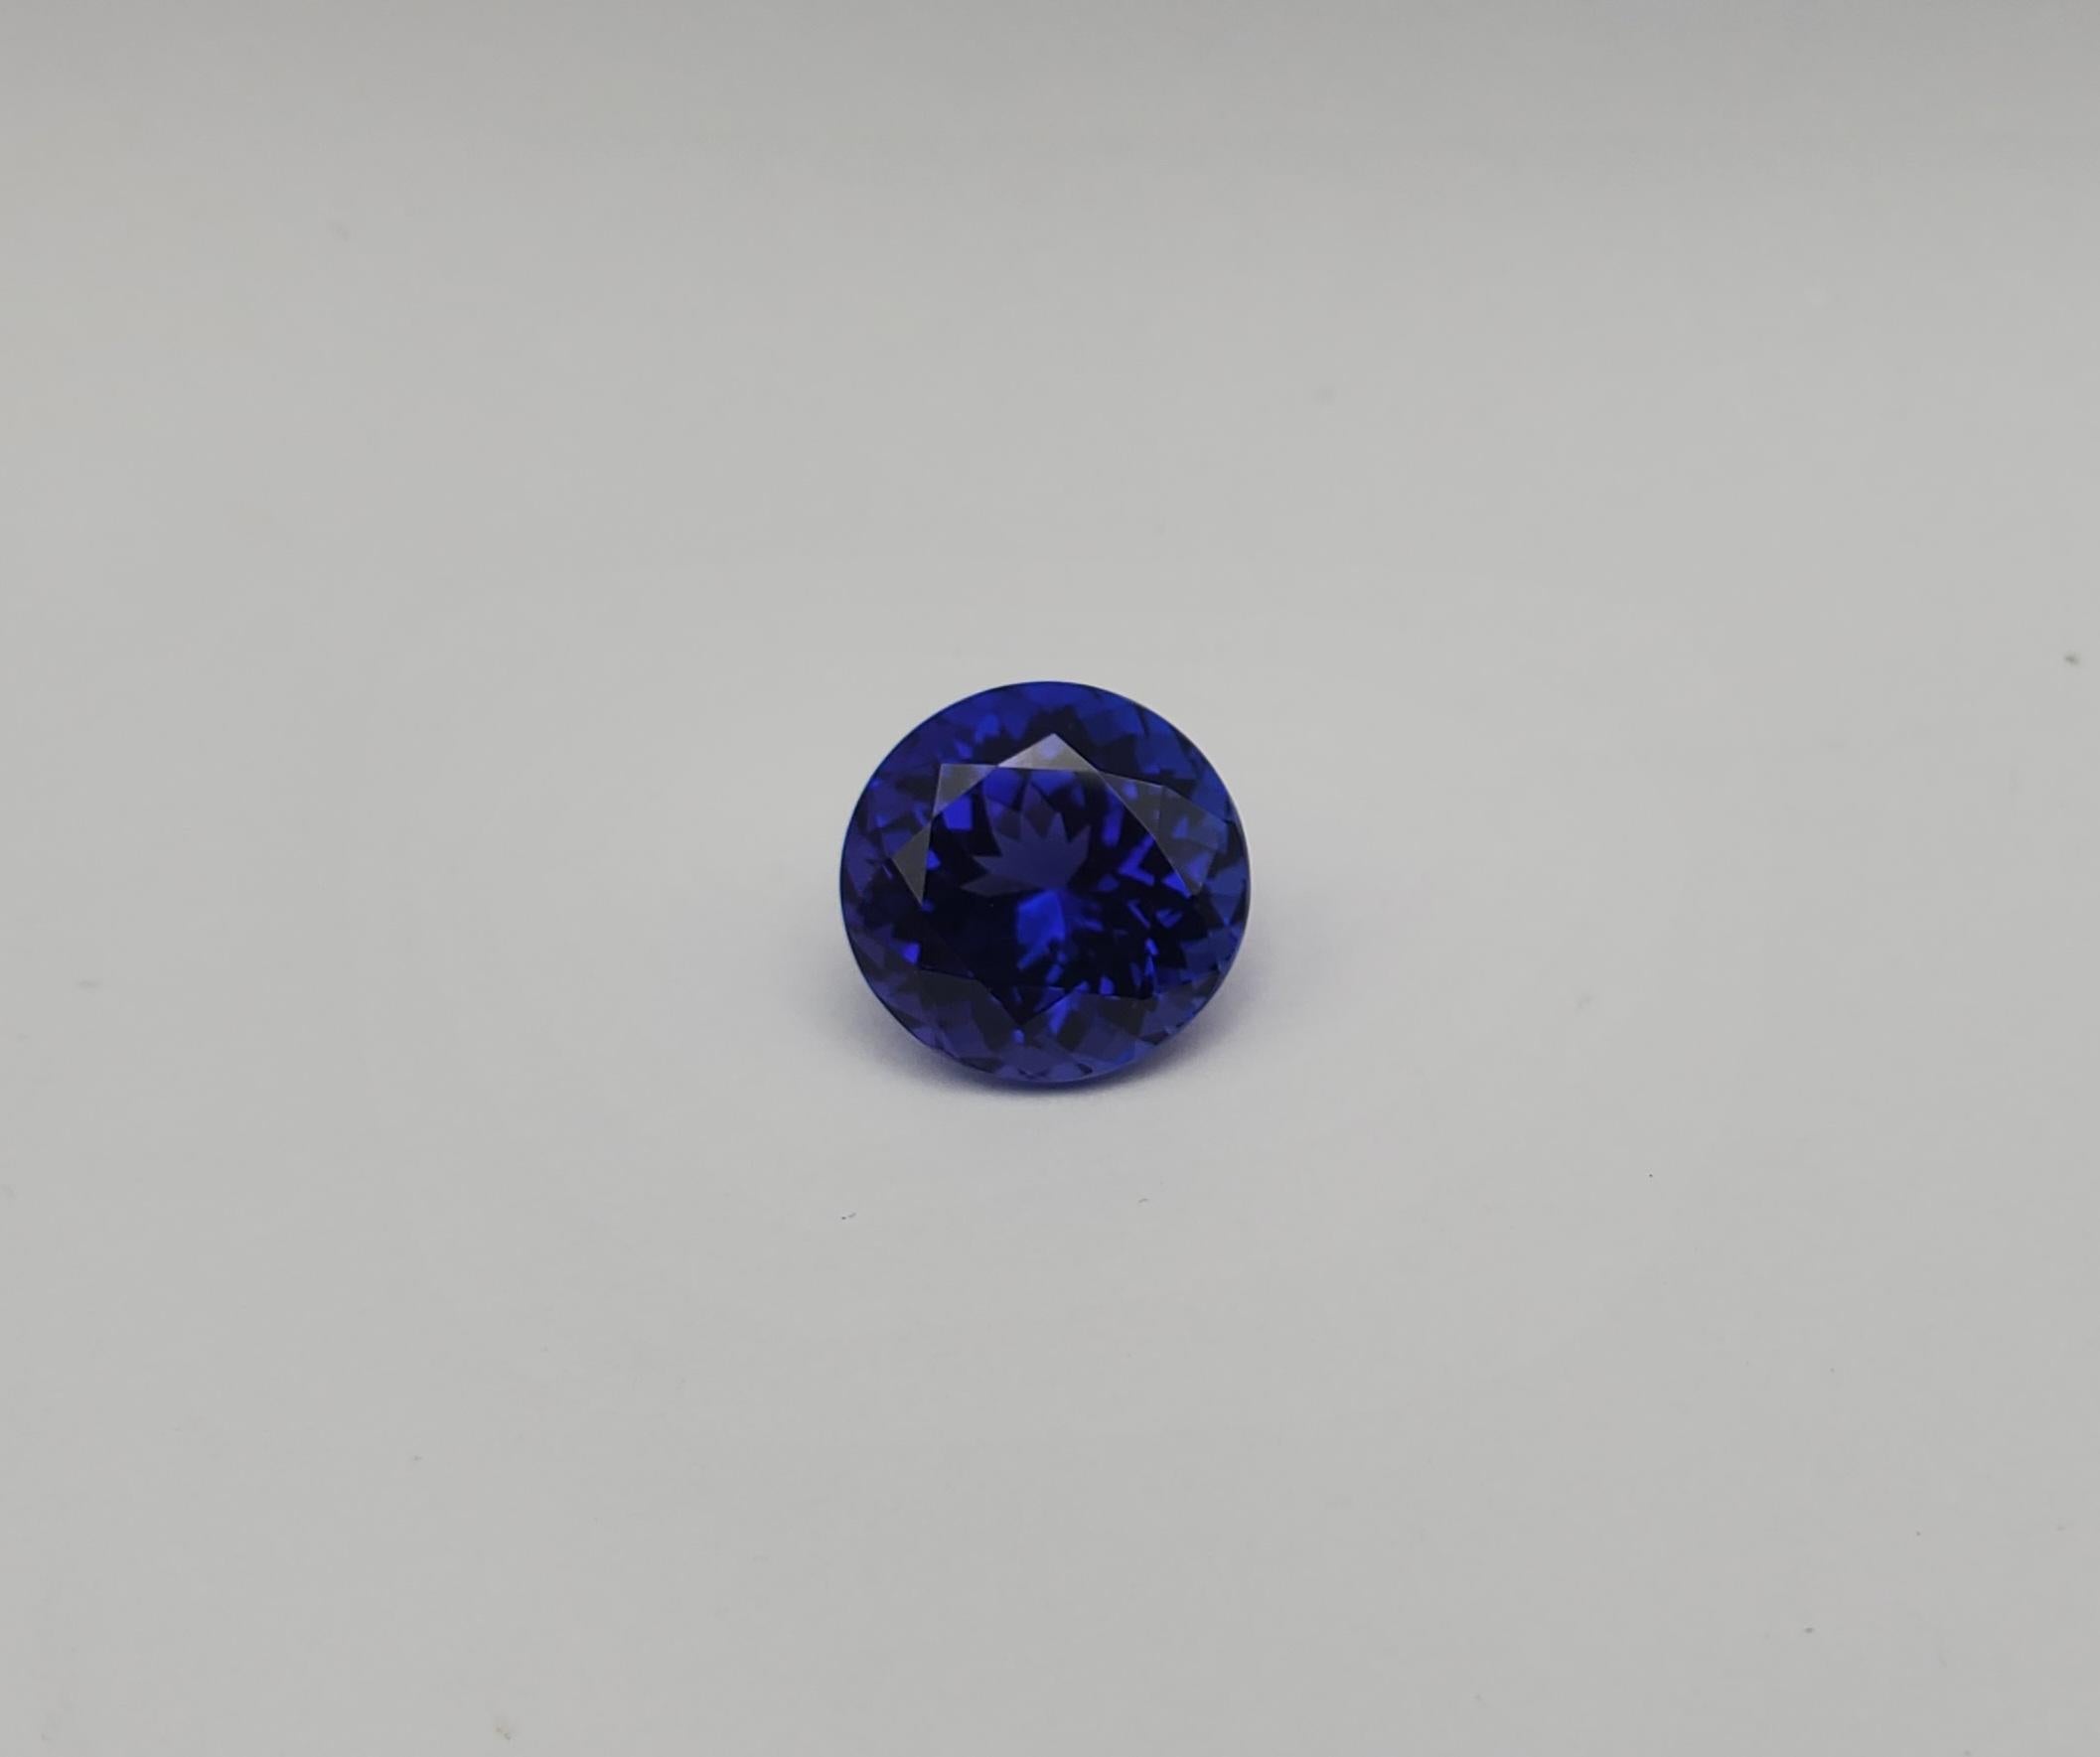 Presenting a breathtaking example of tanzanite's allure: a transparent, 5.17ct round shaped beauty with an exquisite blue-violet shade that will undoubtedly catch the eye of any gemstone connoisseur or jewelry lover. The gem measures a refined 10.49